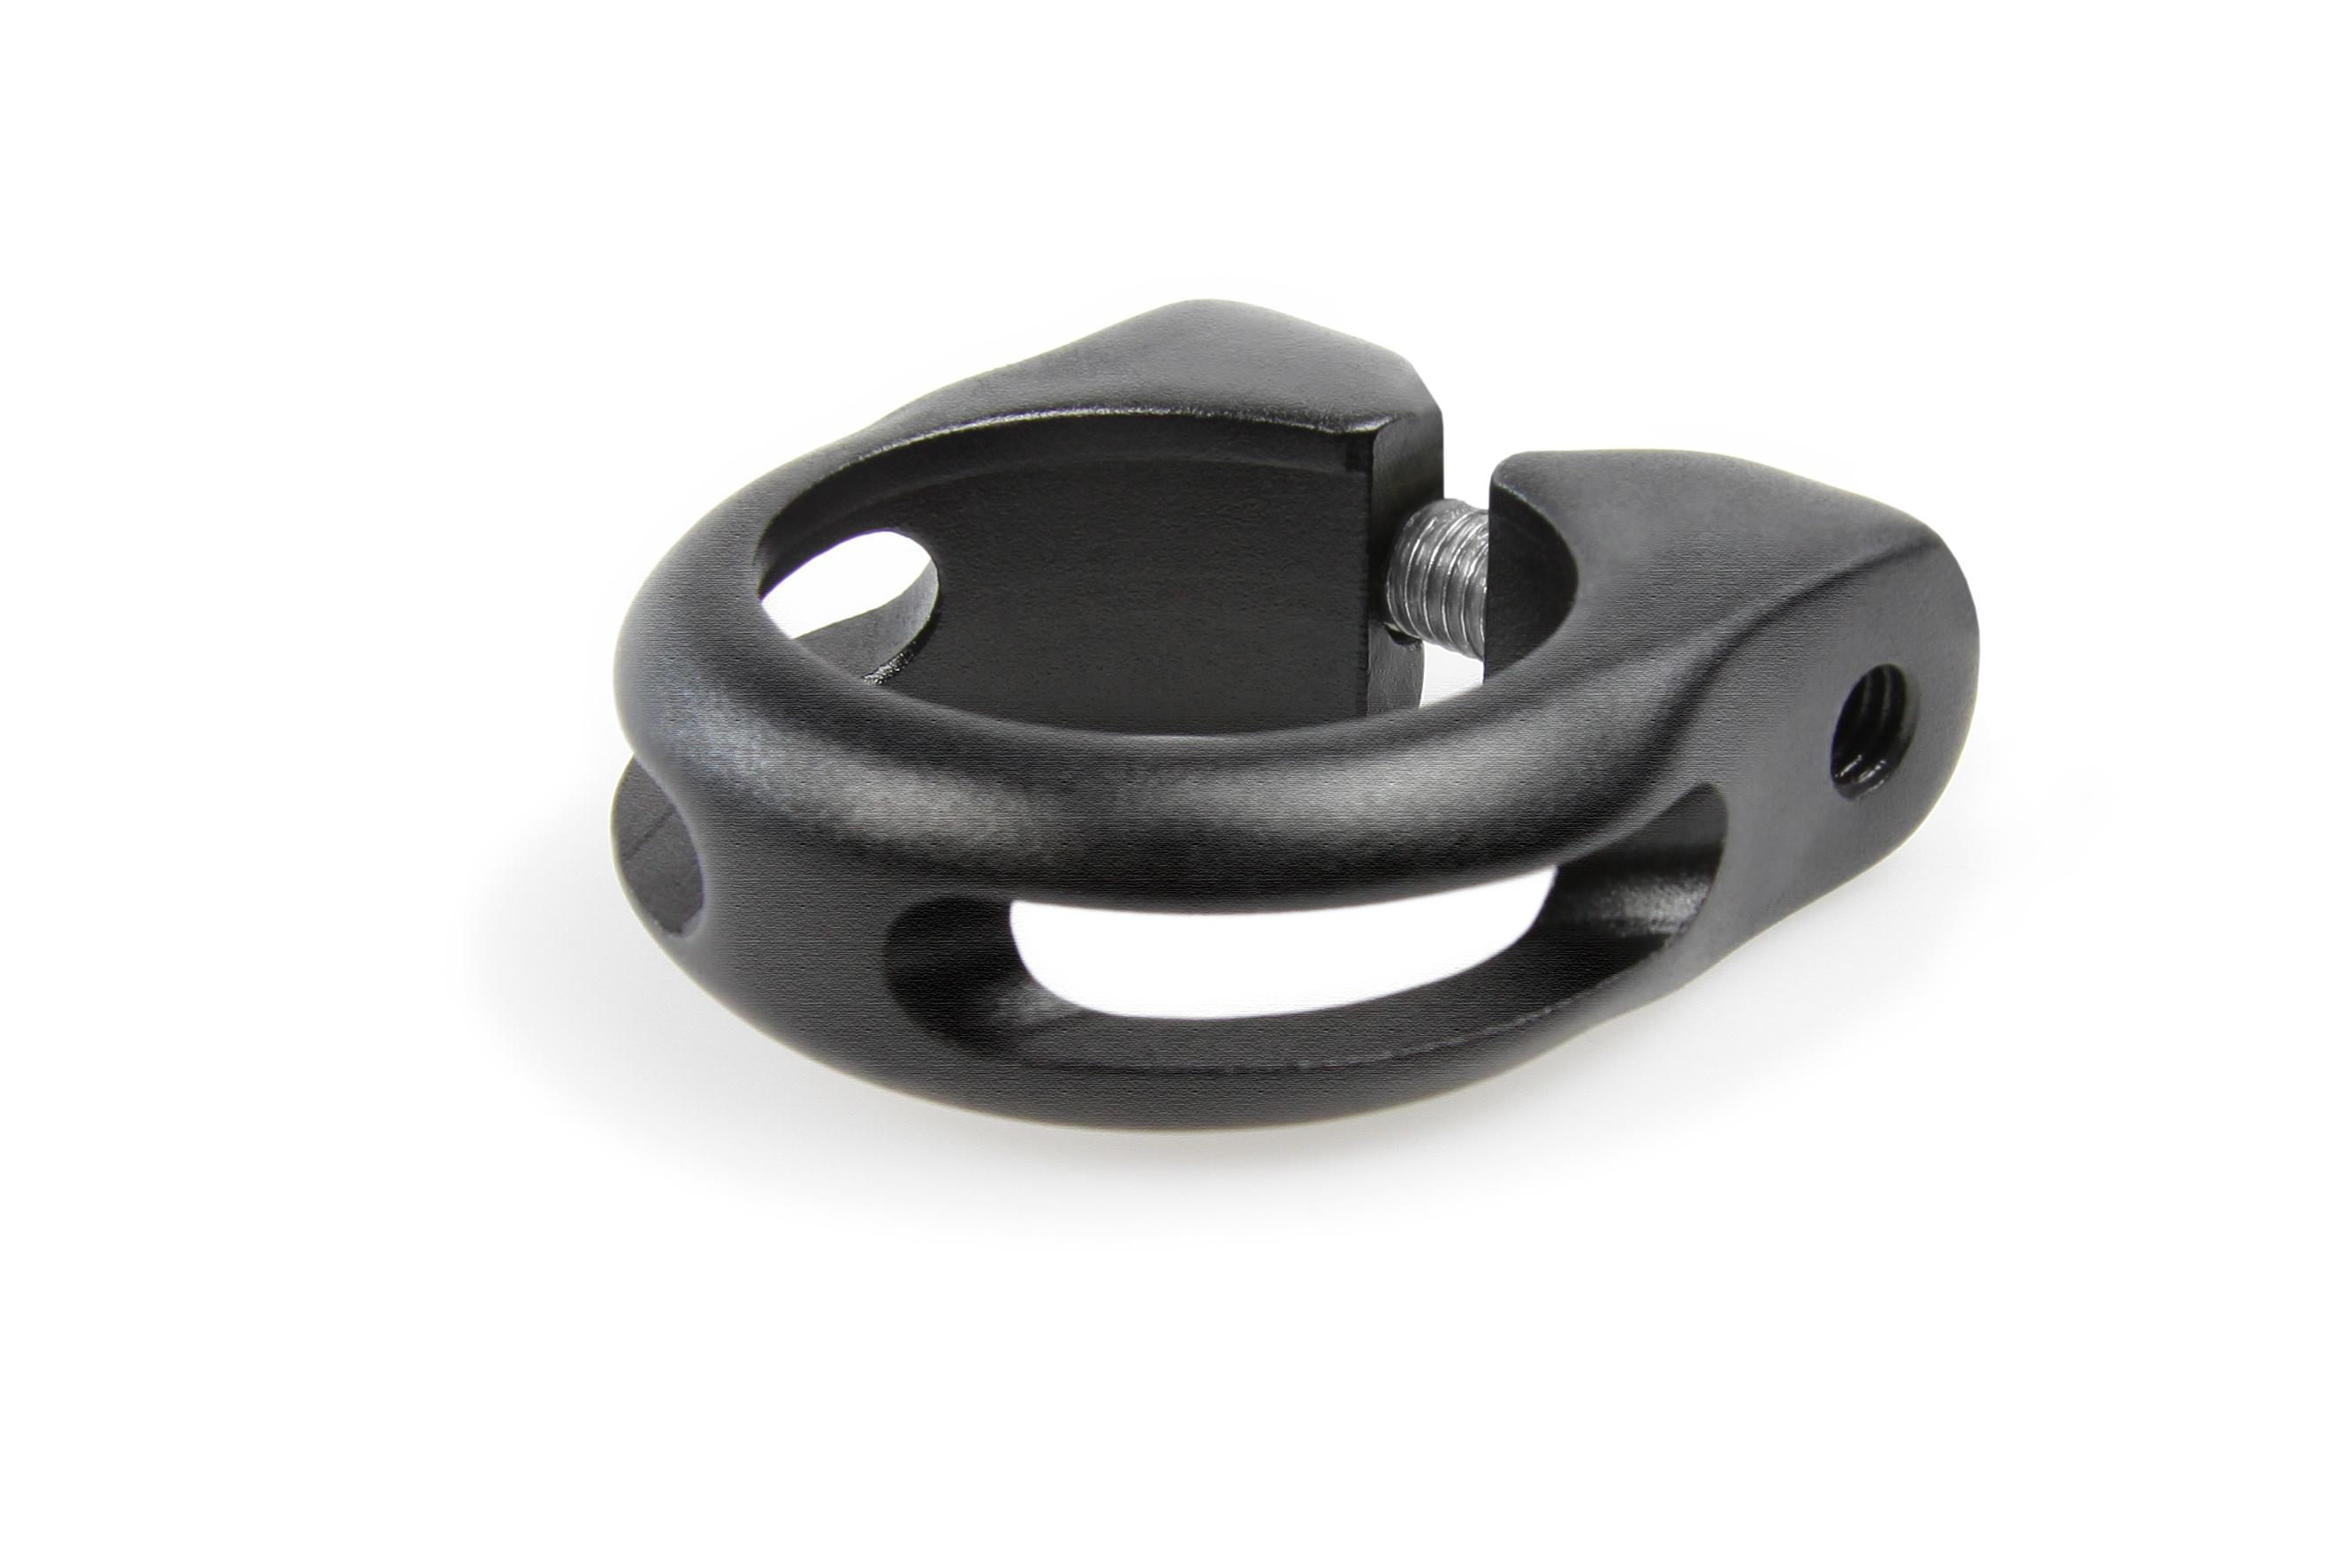 Foto Tija Red Cycling Products Comp Clamp gris/negro , 28,6 mm foto 775279